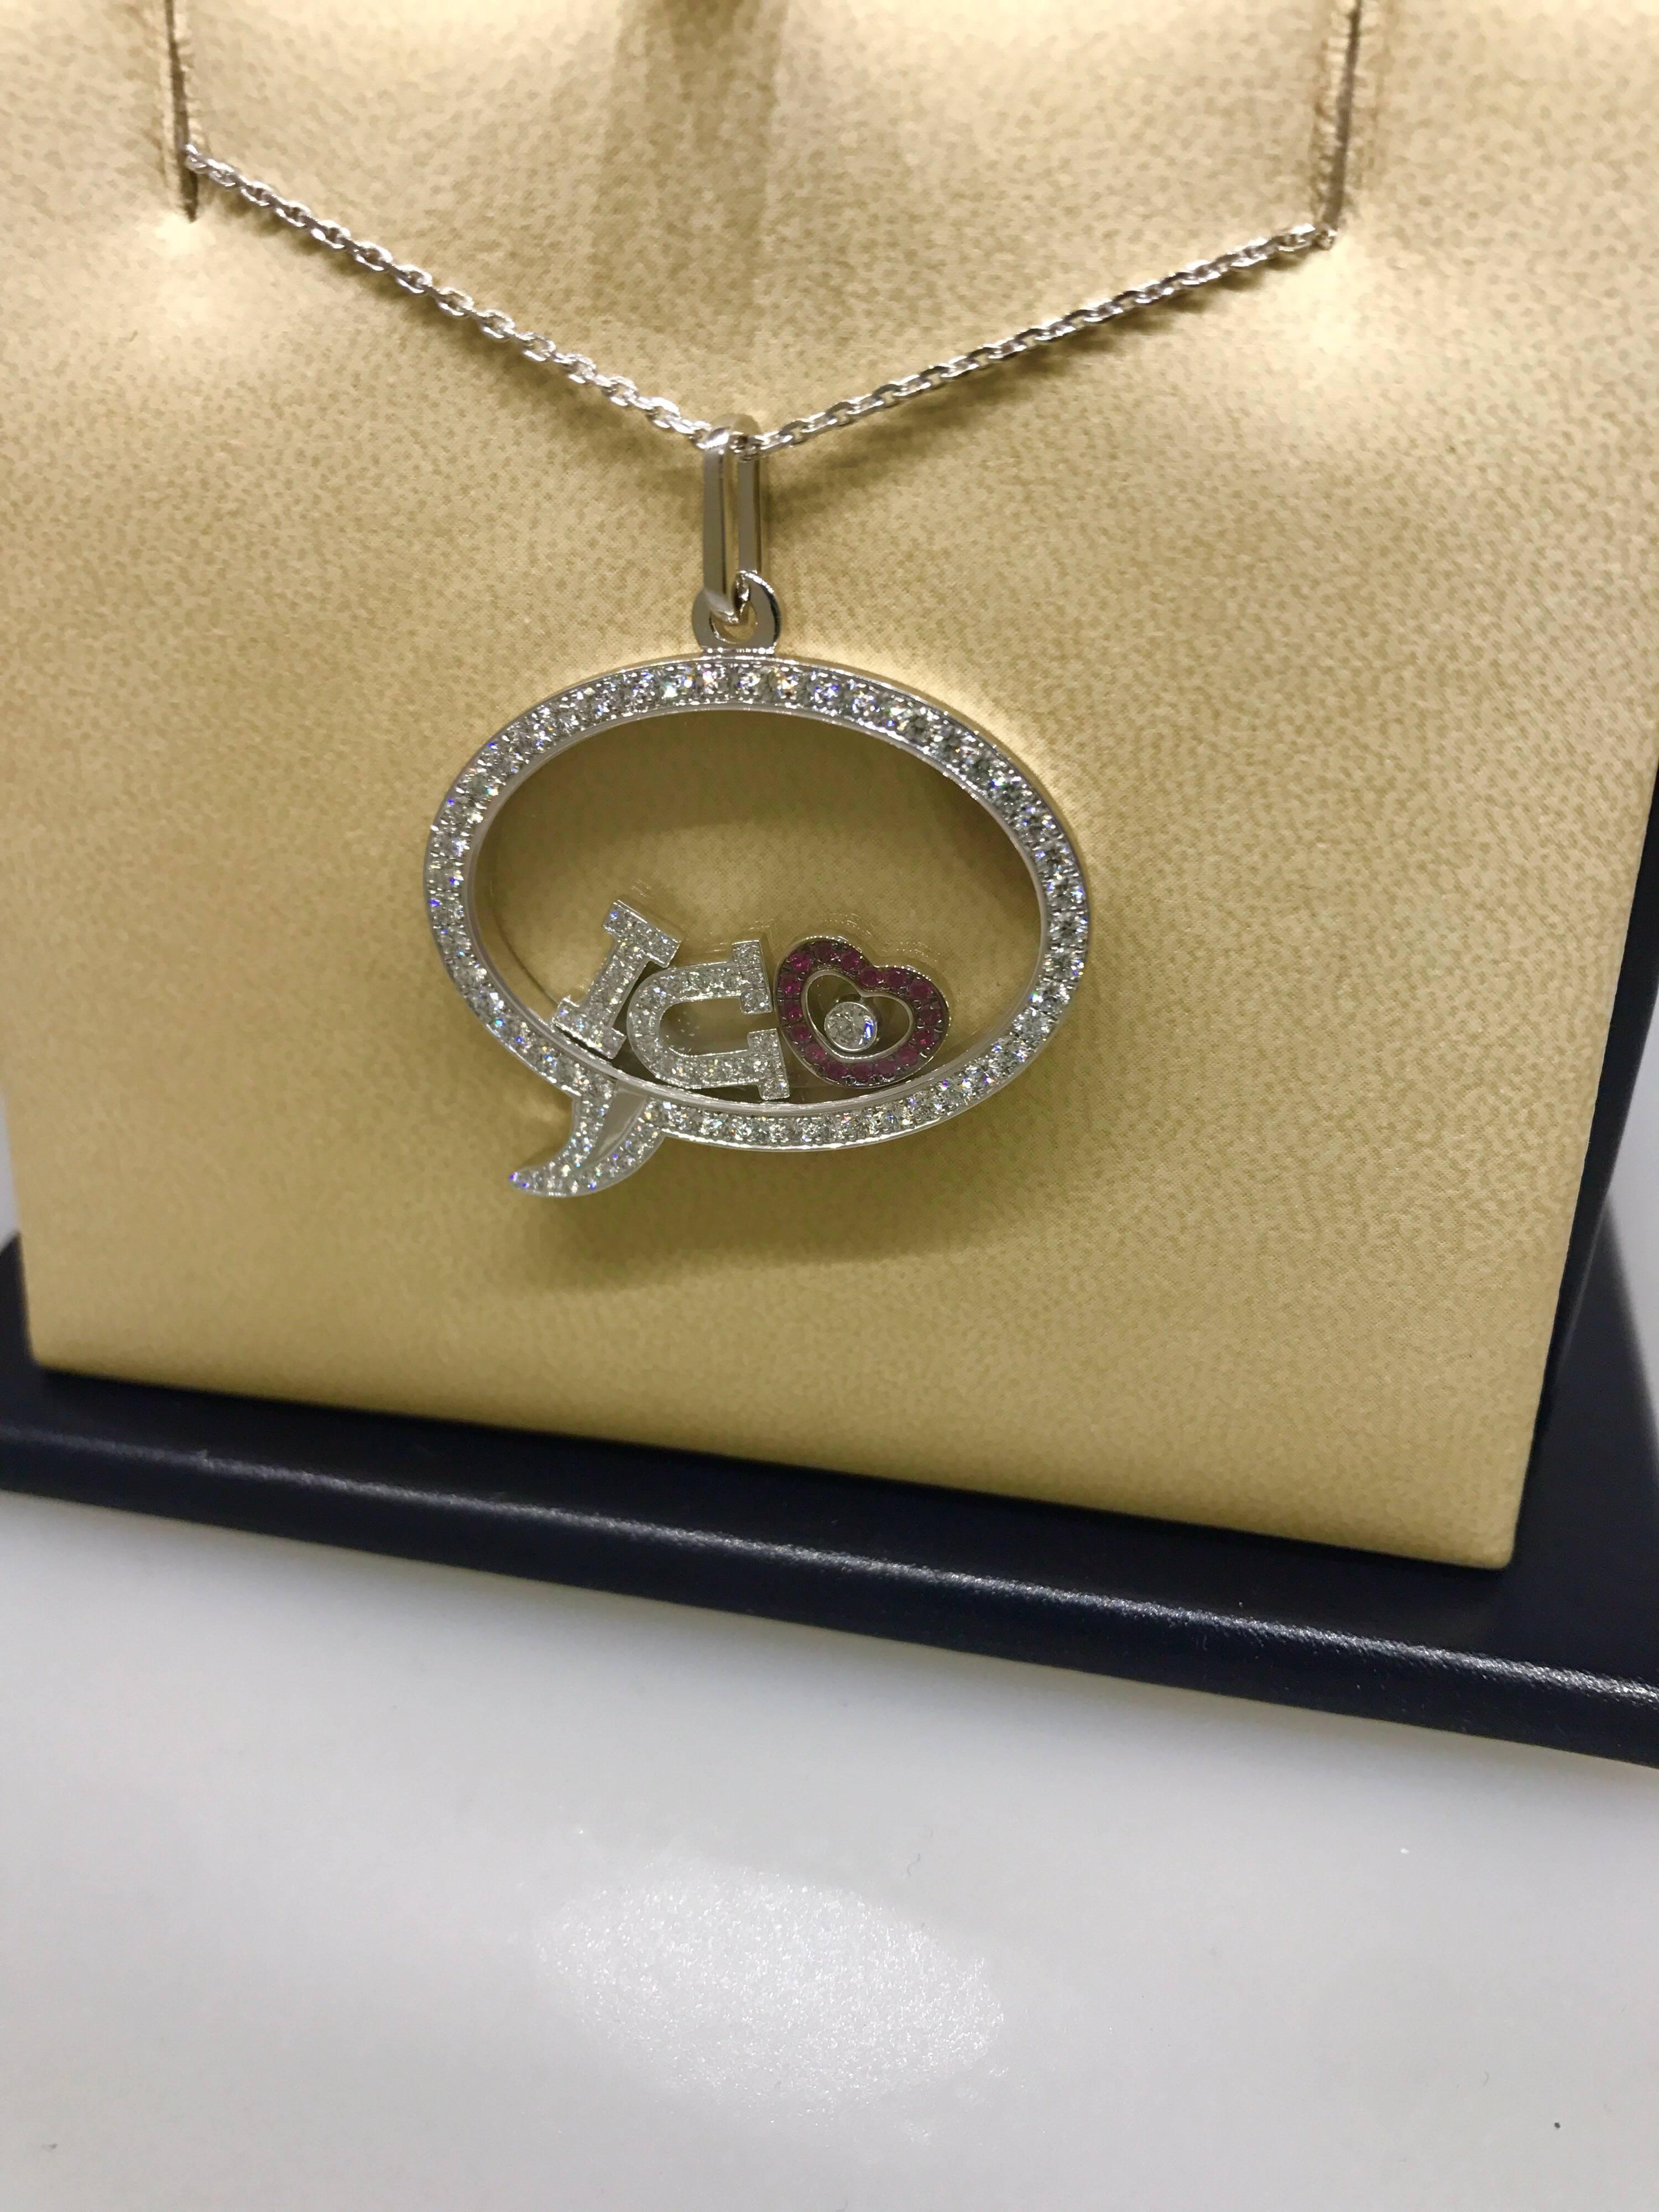 Chopard Happy Diamonds I Love U Pendant / Necklace

Model Number: 79/5749-1003

100% Authentic

Brand New

Comes with original Chopard box, certificate of authenticity and warranty, and jewels manual

18 Karat White Gold (21.60gr)

85 Diamonds on